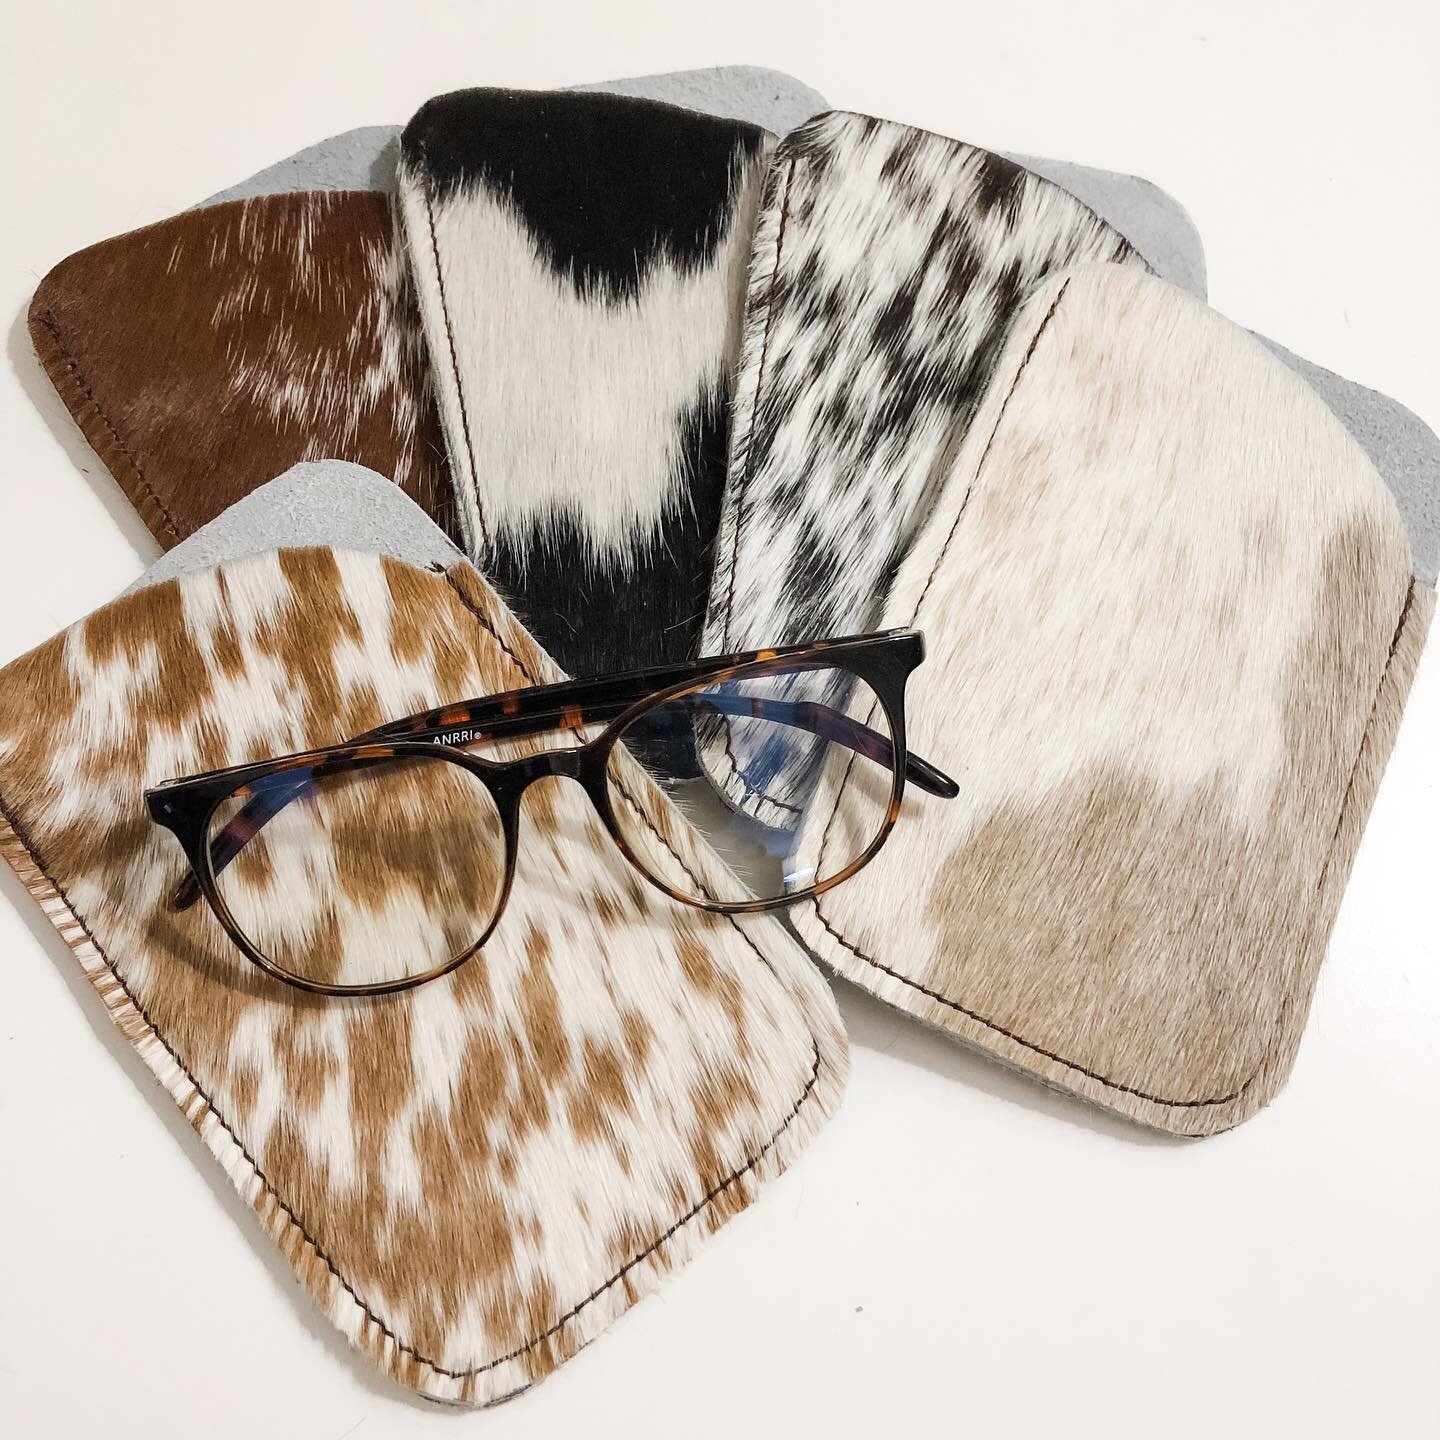 New glasses pouches are online now 🤩 Handcrafted with genuine cowhide and the perfect stocking stuffer ✨

More items coming next week🙌🏼

#FollowTheHerd 🐂🐃🐄